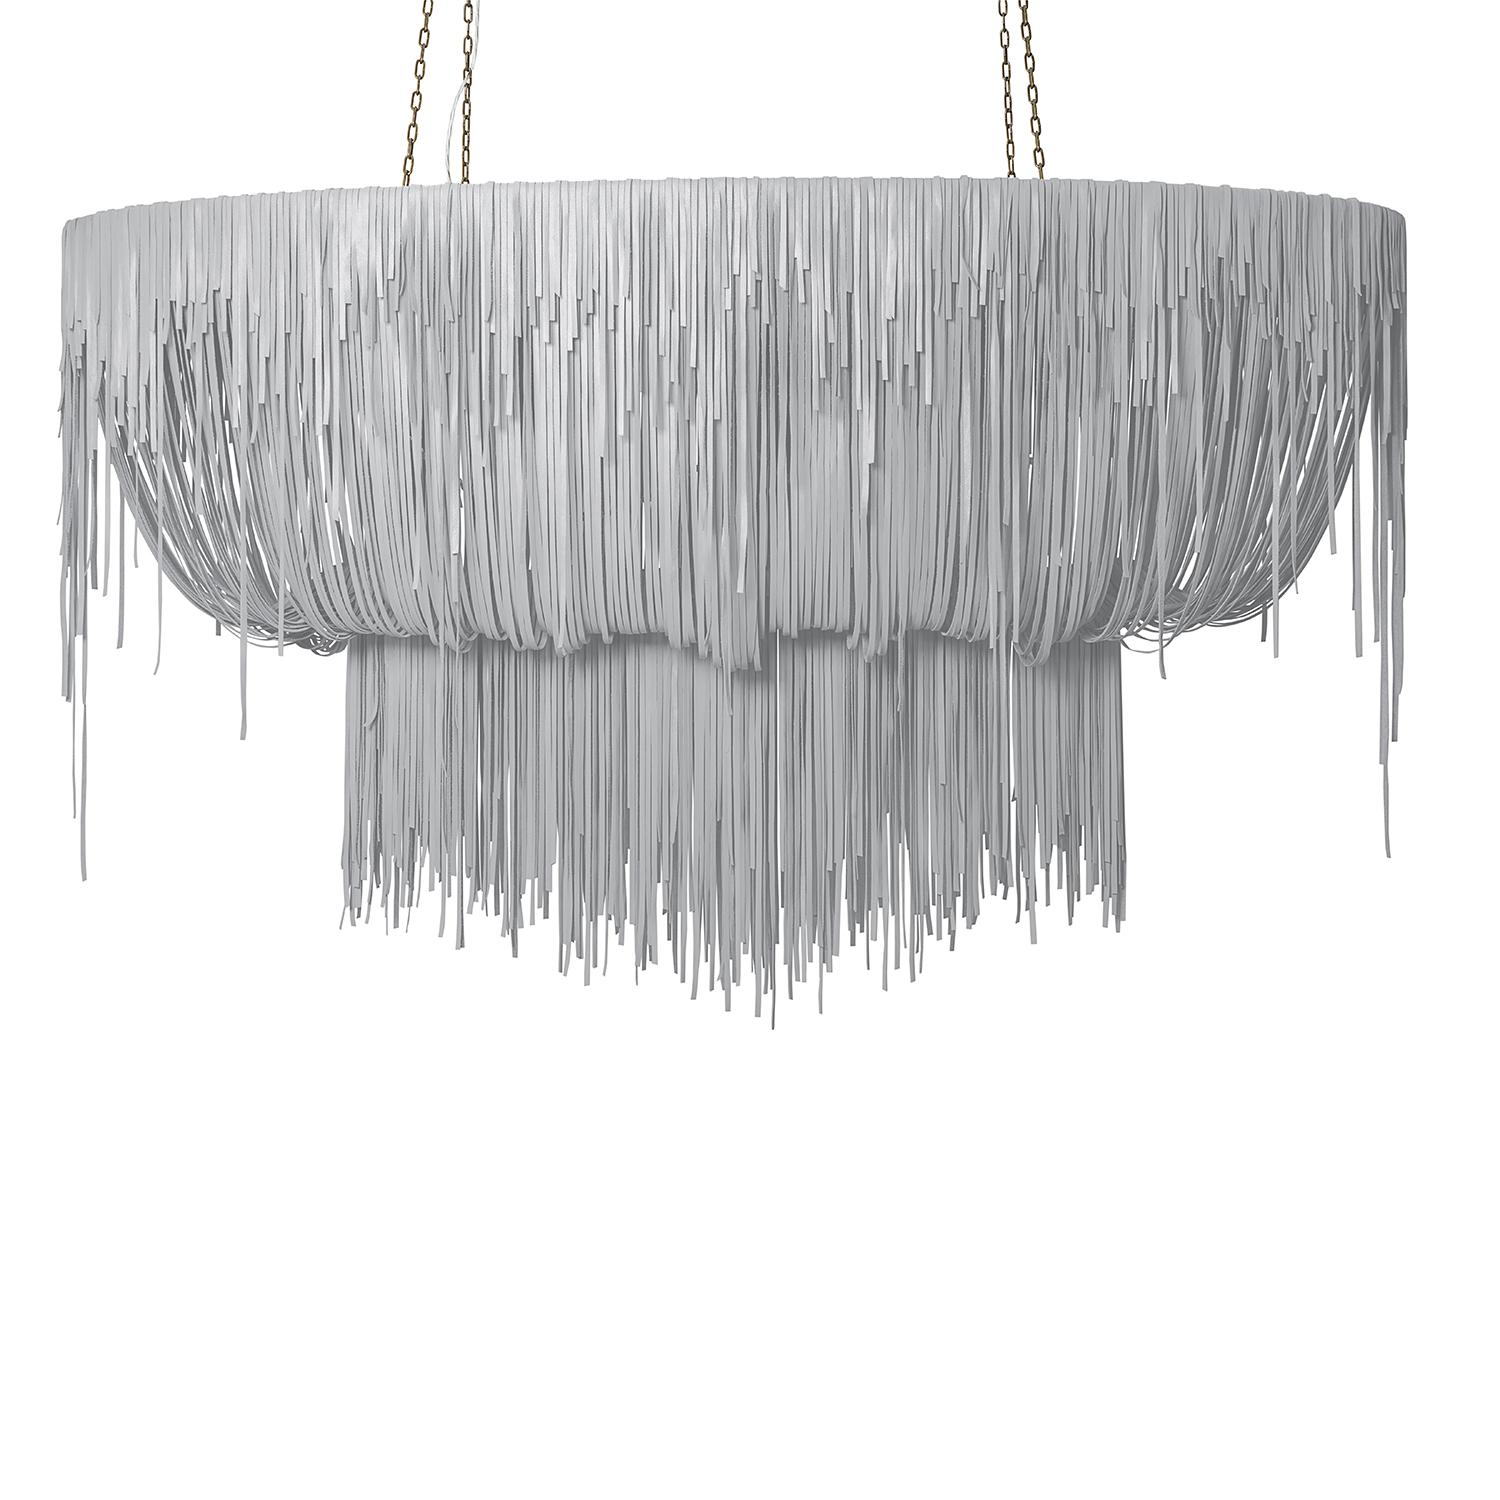 Stretch Oval Urchin Leather Chandelier in Metallic Leather